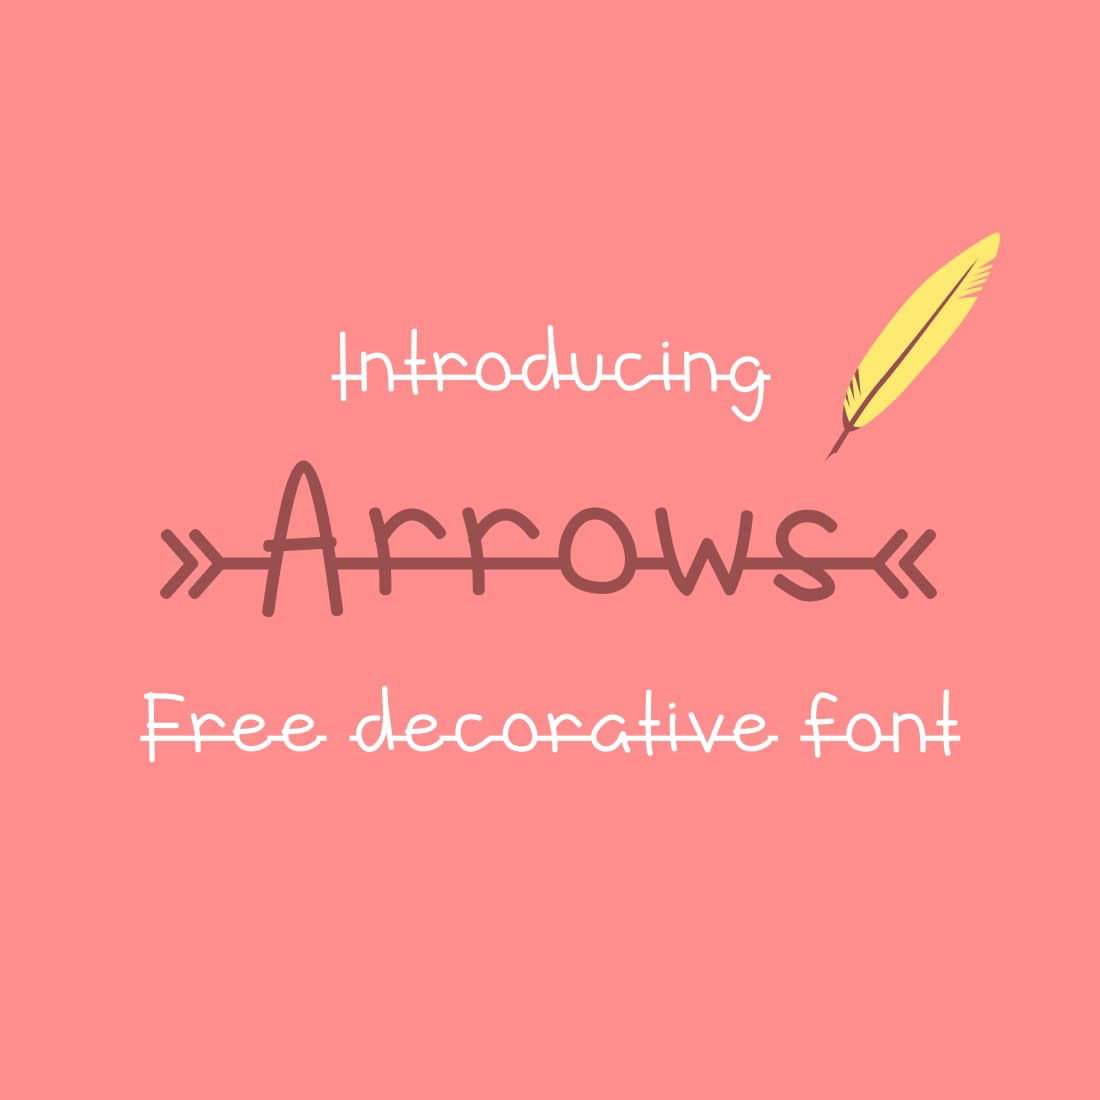 Main cover preview for decorative arrow font free by MasterBundles.